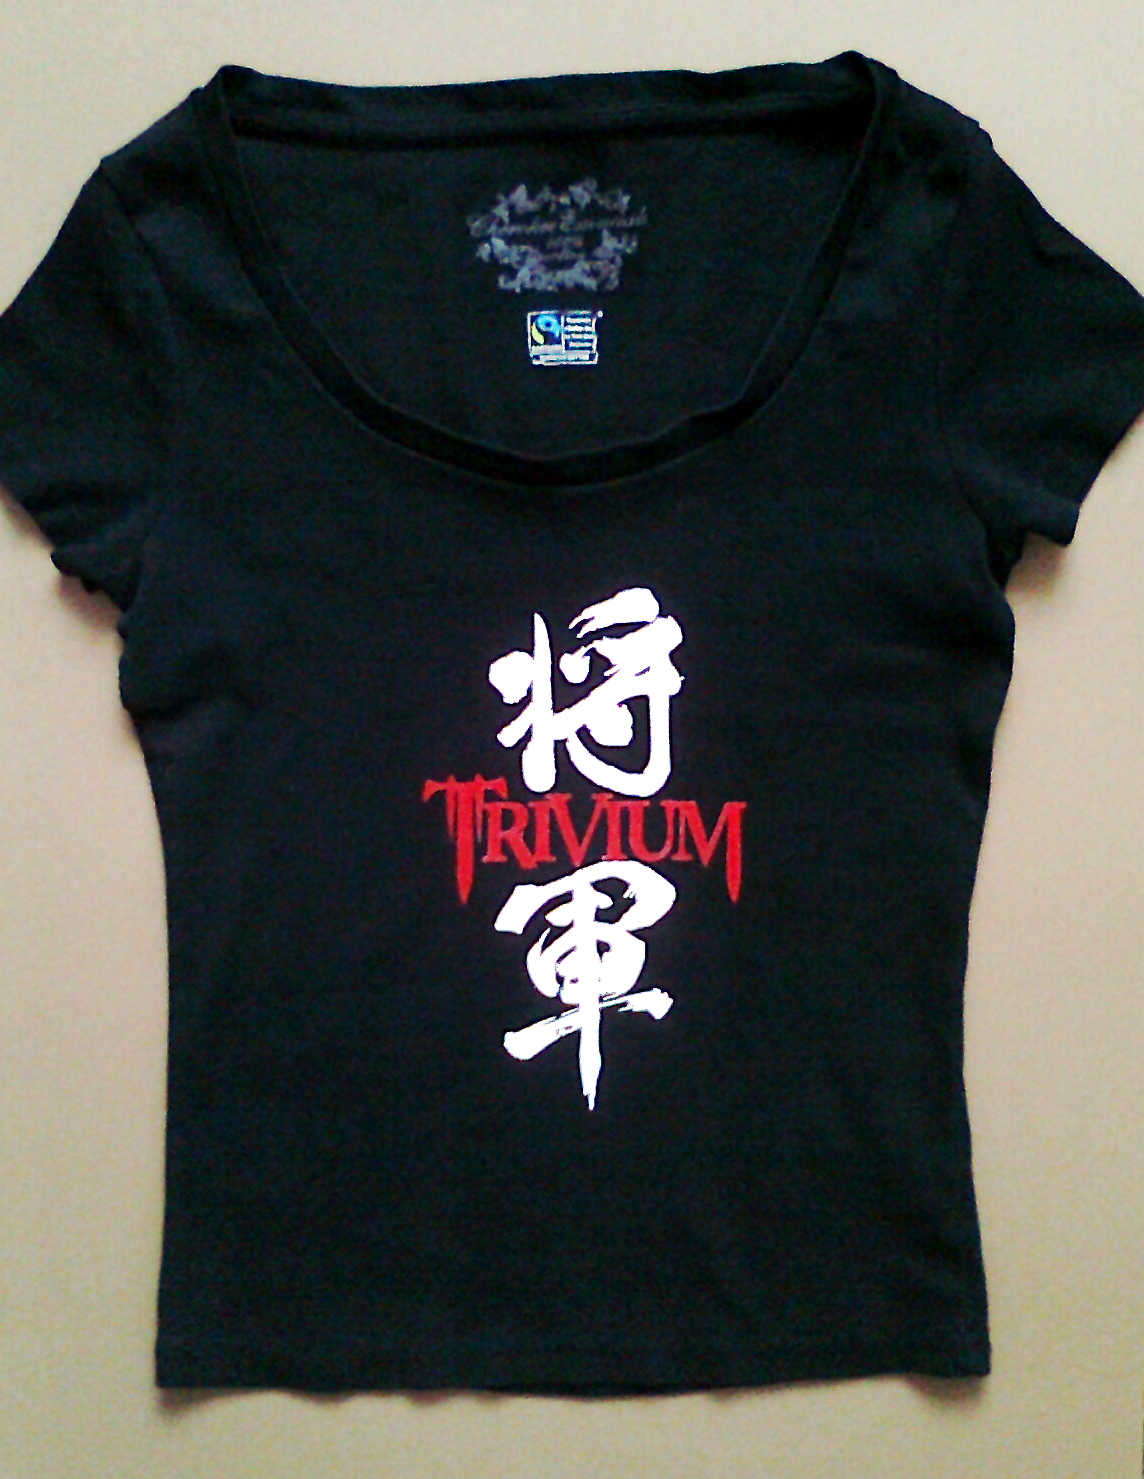 My New T-Shirt_Trivium (front view) by Trix92